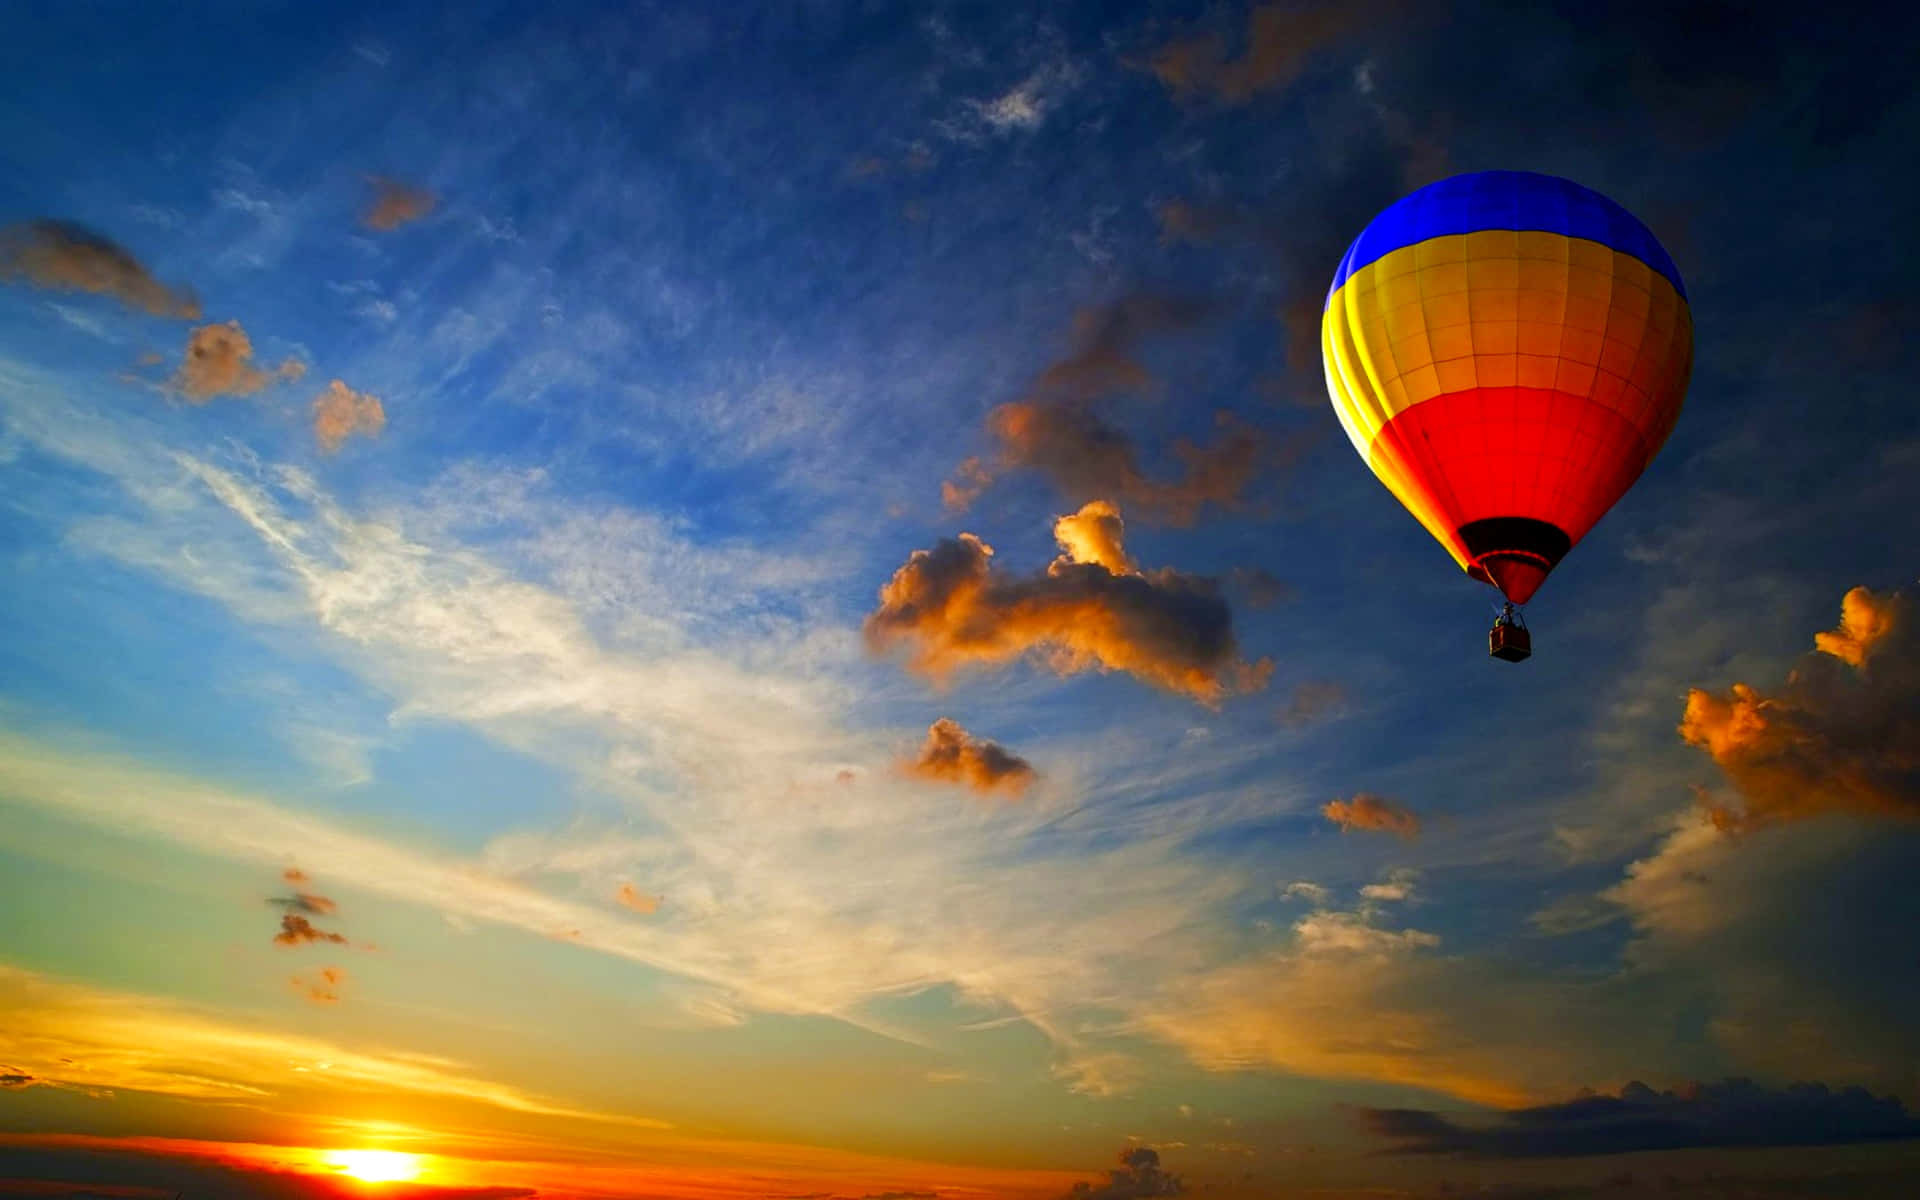 A Hot Air Balloon Flying In The Sky At Sunset